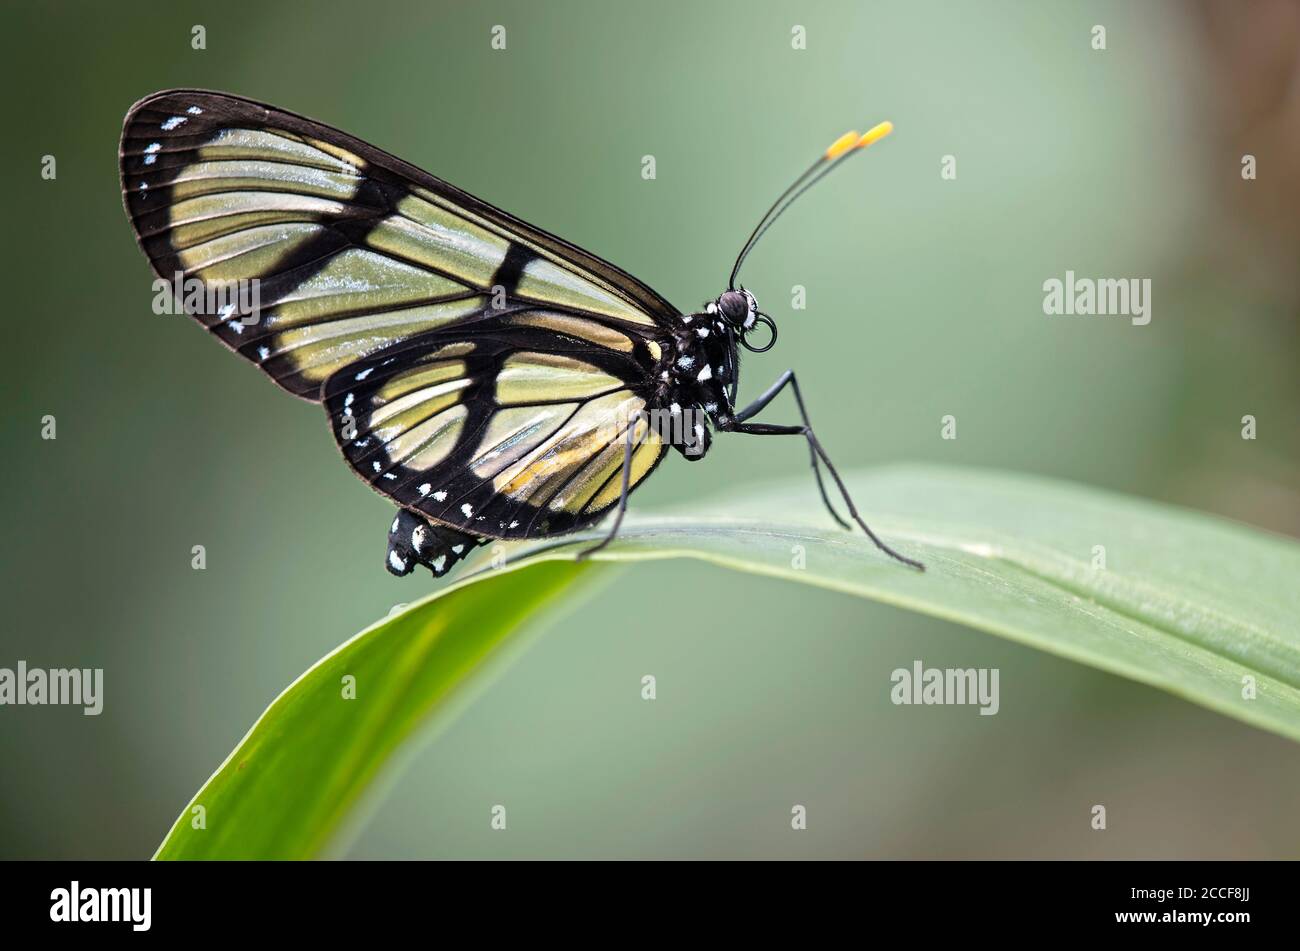 Neotropic glass-wing butterfly, Methona confusa, family of noble butterflies (Nymphalidae), Mindo Region, Ecuador Stock Photo